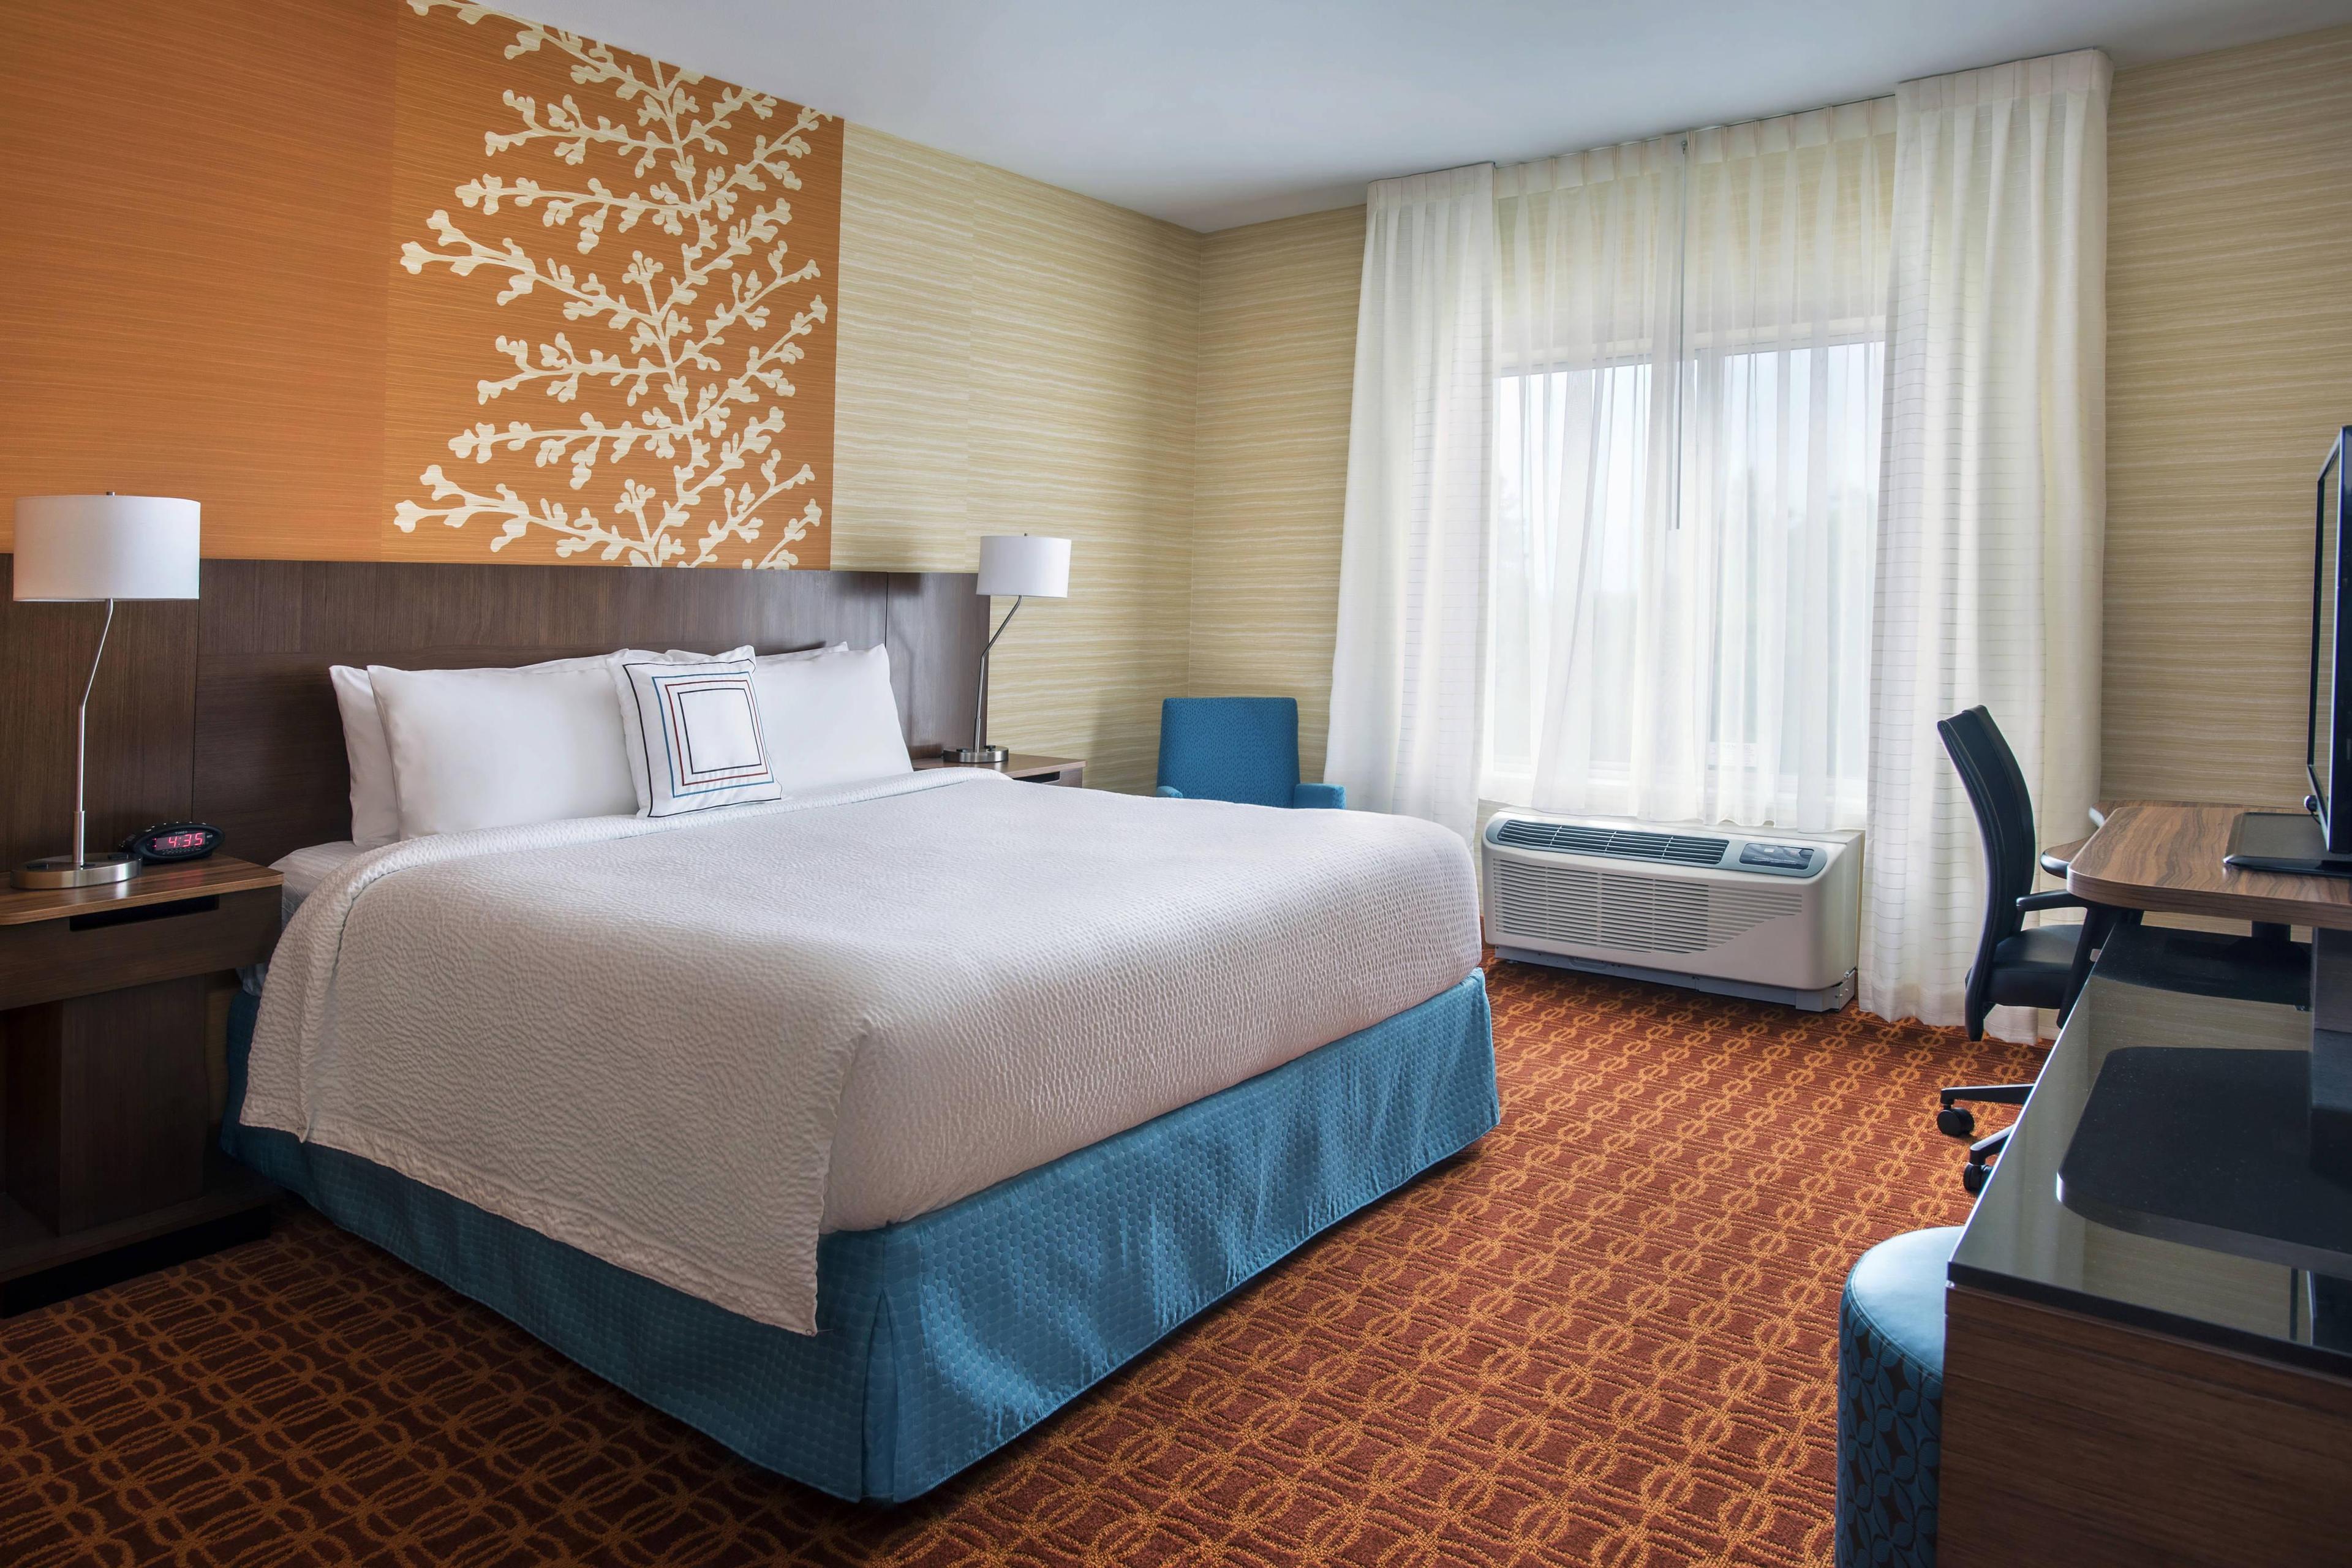 All of our rooms include a microwave, refrigerator and individual coffee maker!